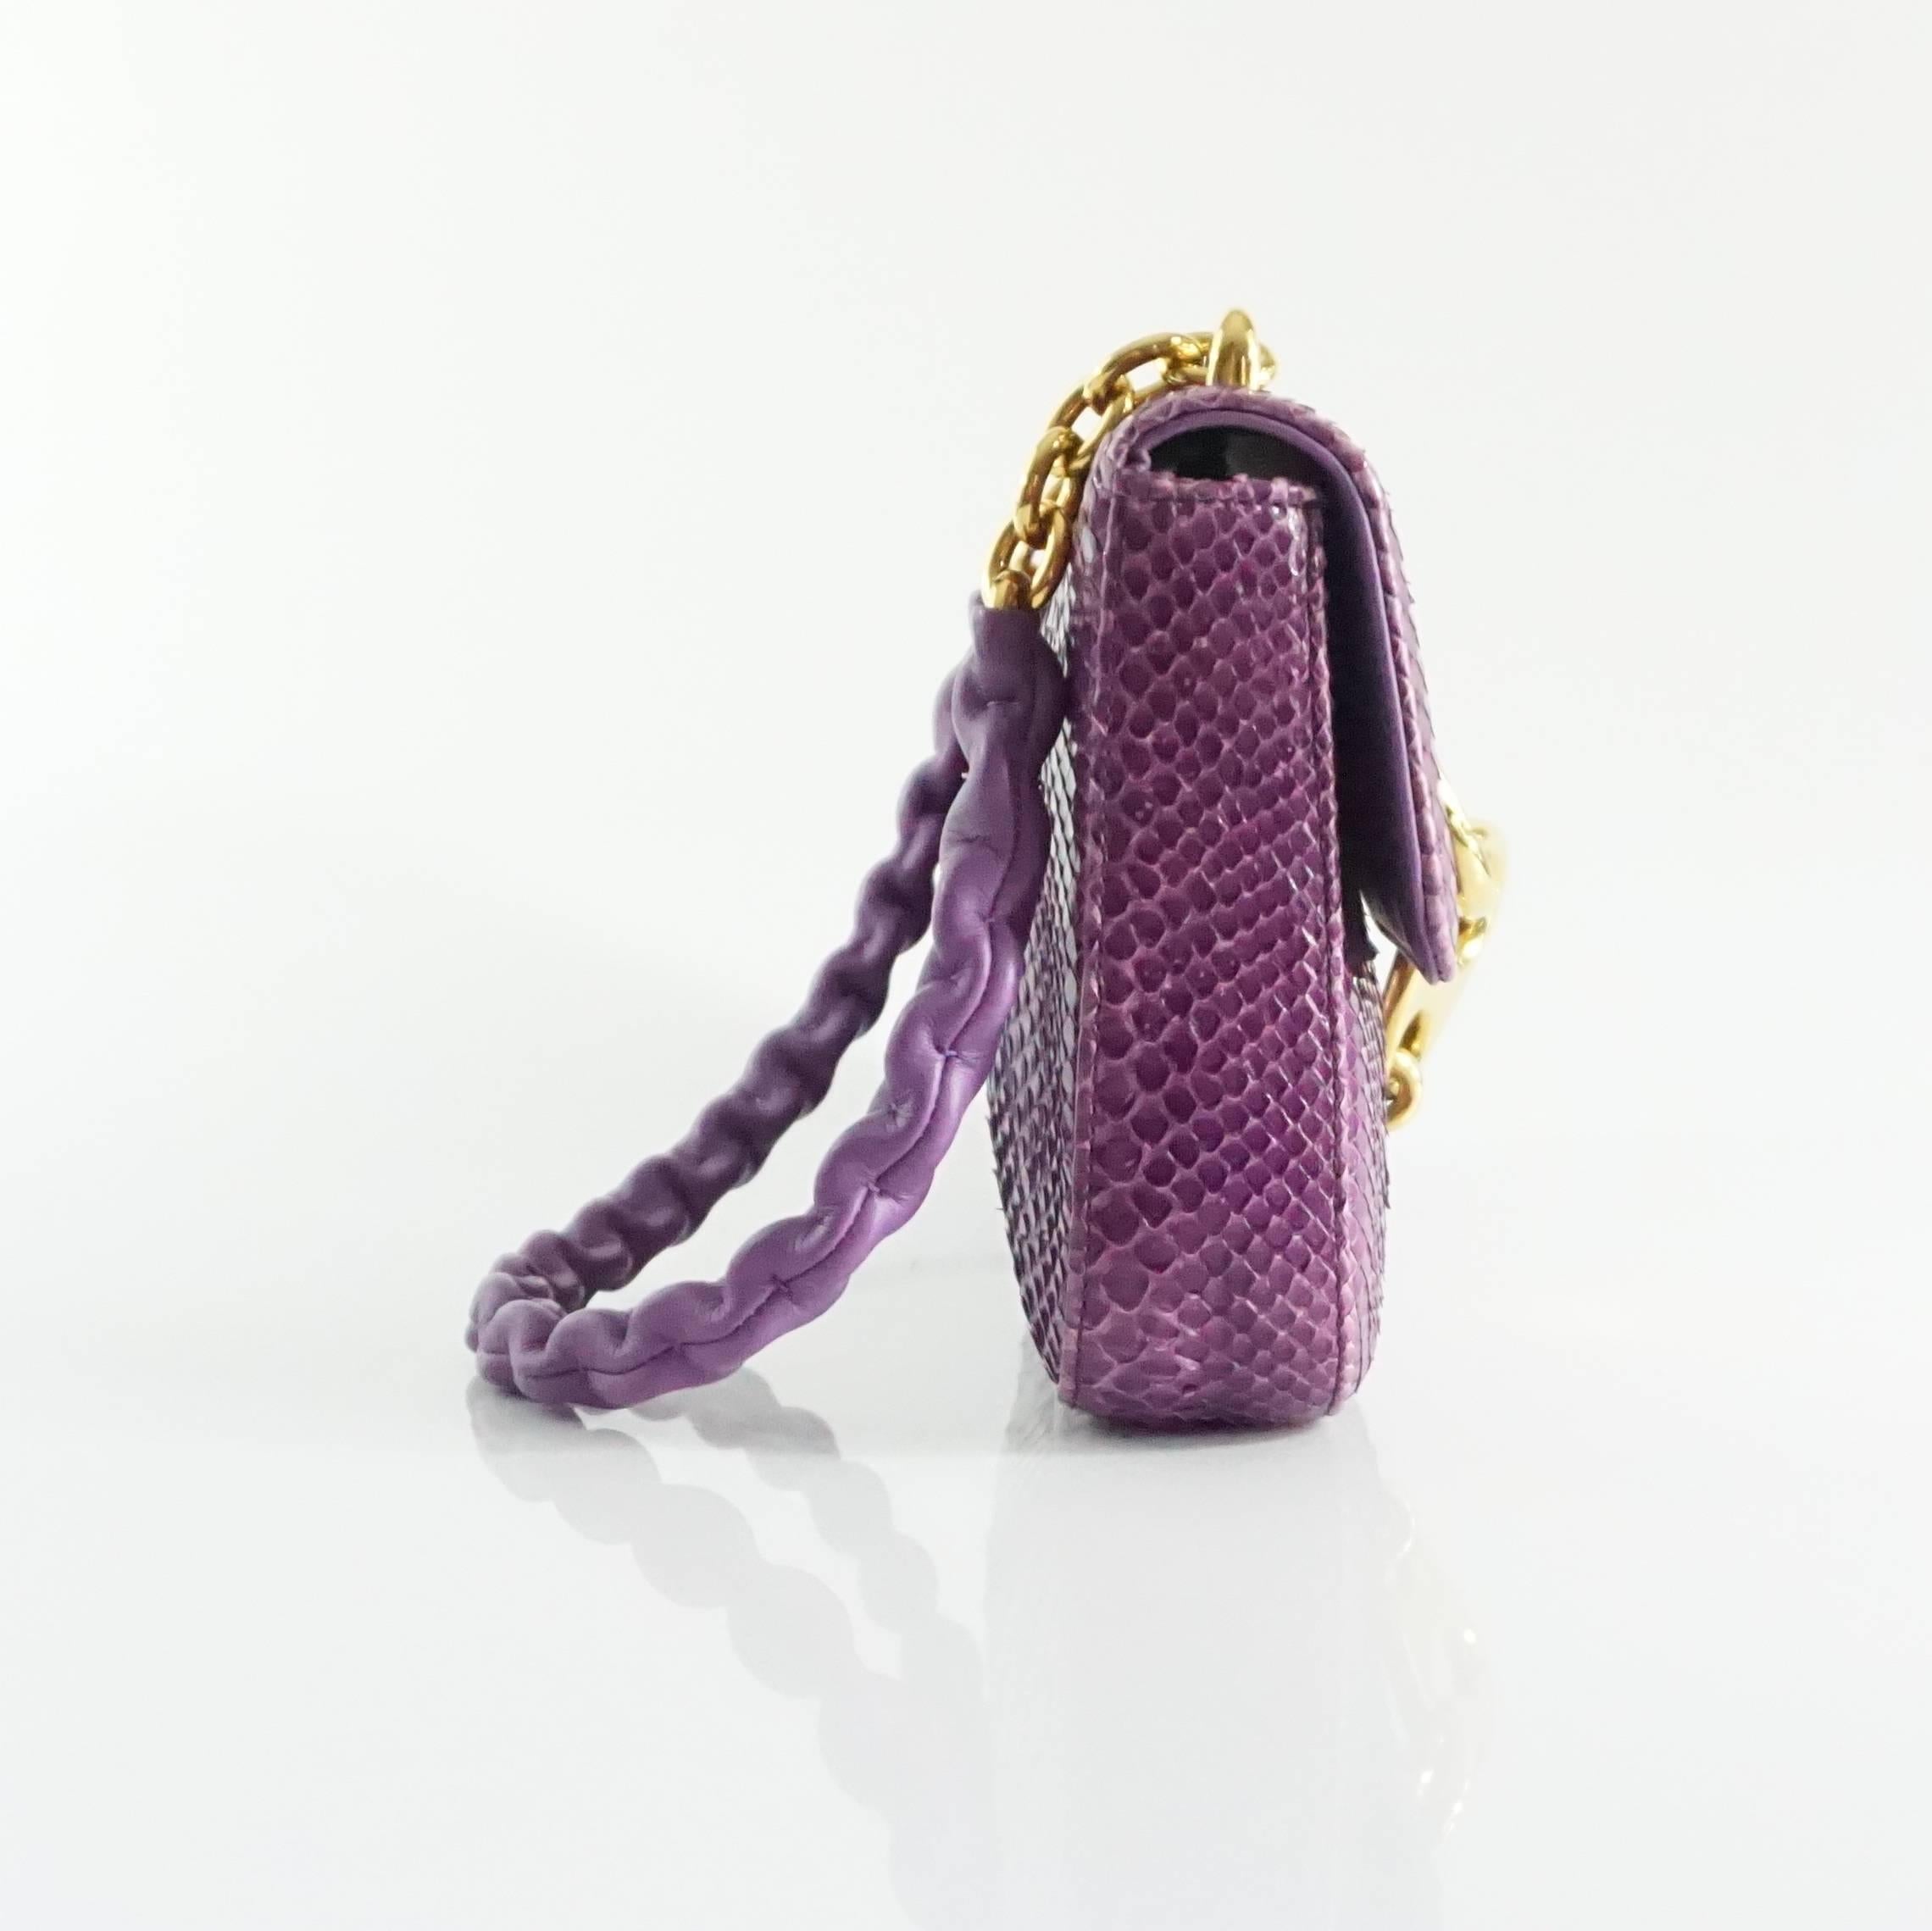 This Tom Ford purple python bag has a large link closure and gold chain strap with leather overlay. The bag is a flap style with purple leather lining and one zip pocket. The bag is in excellent condition with very minor raising of the scales that